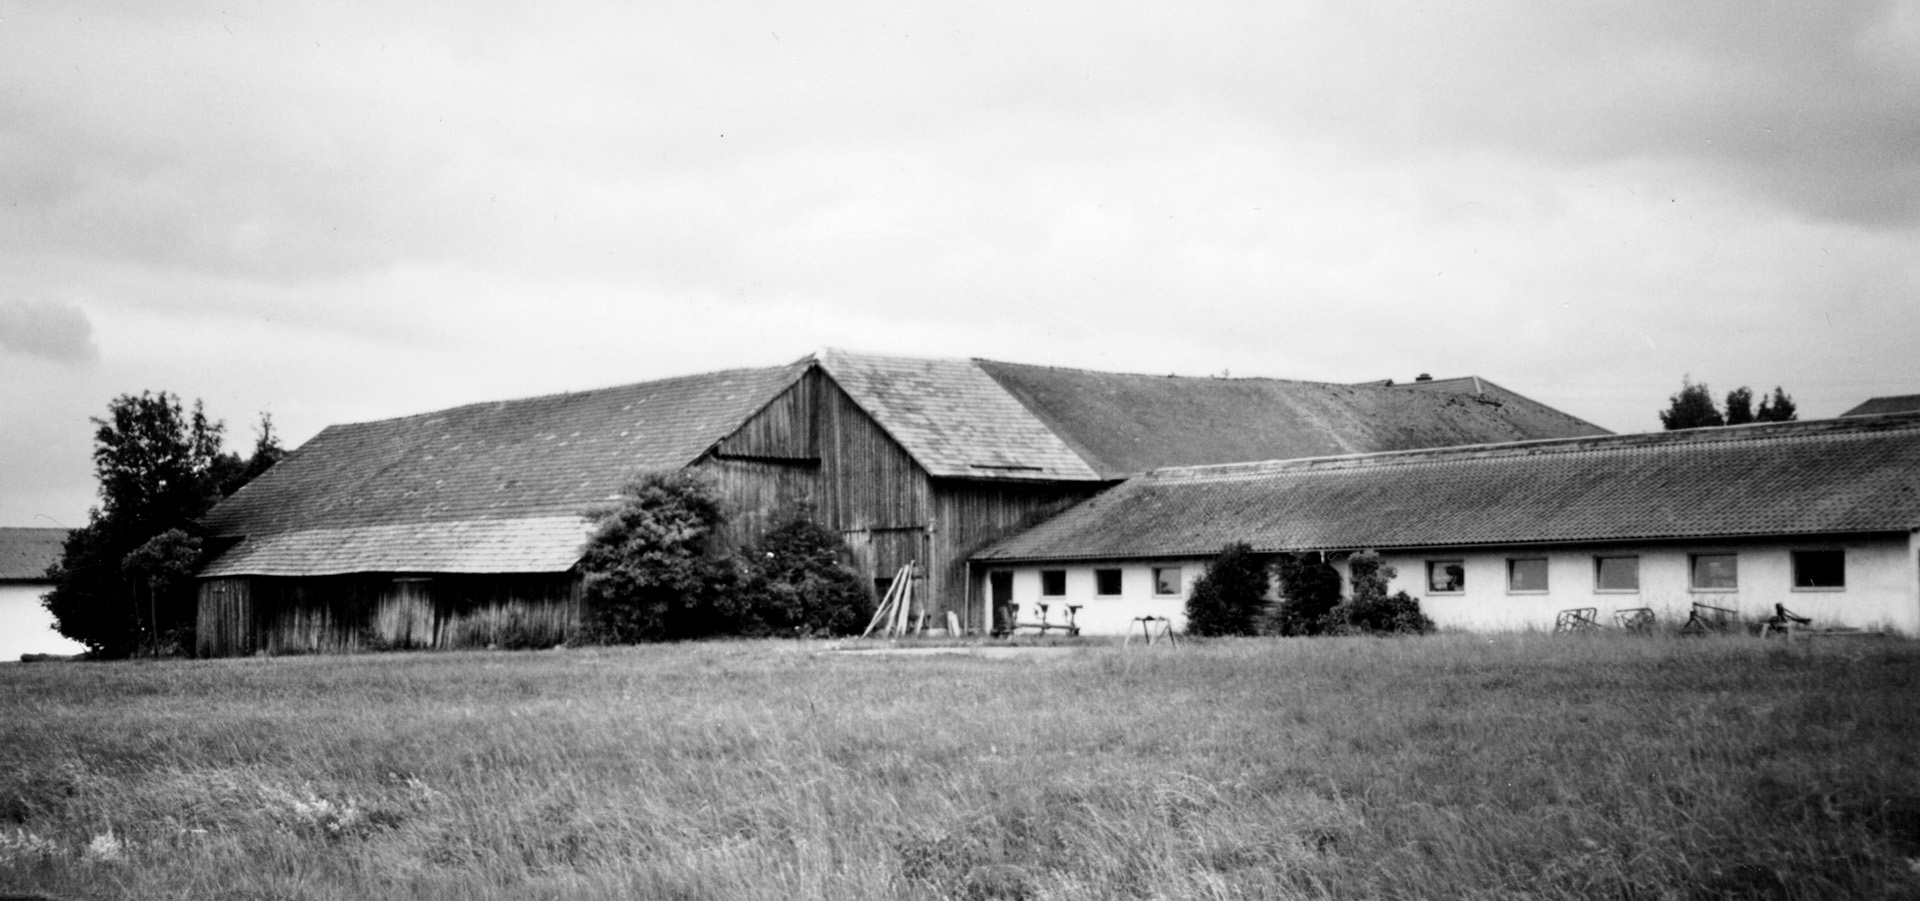 Some of the surviving members of the death march from Berga recall that they were in this barn on the outskirts of the village of Rötz in Bavaria, when they were finally liberated. 